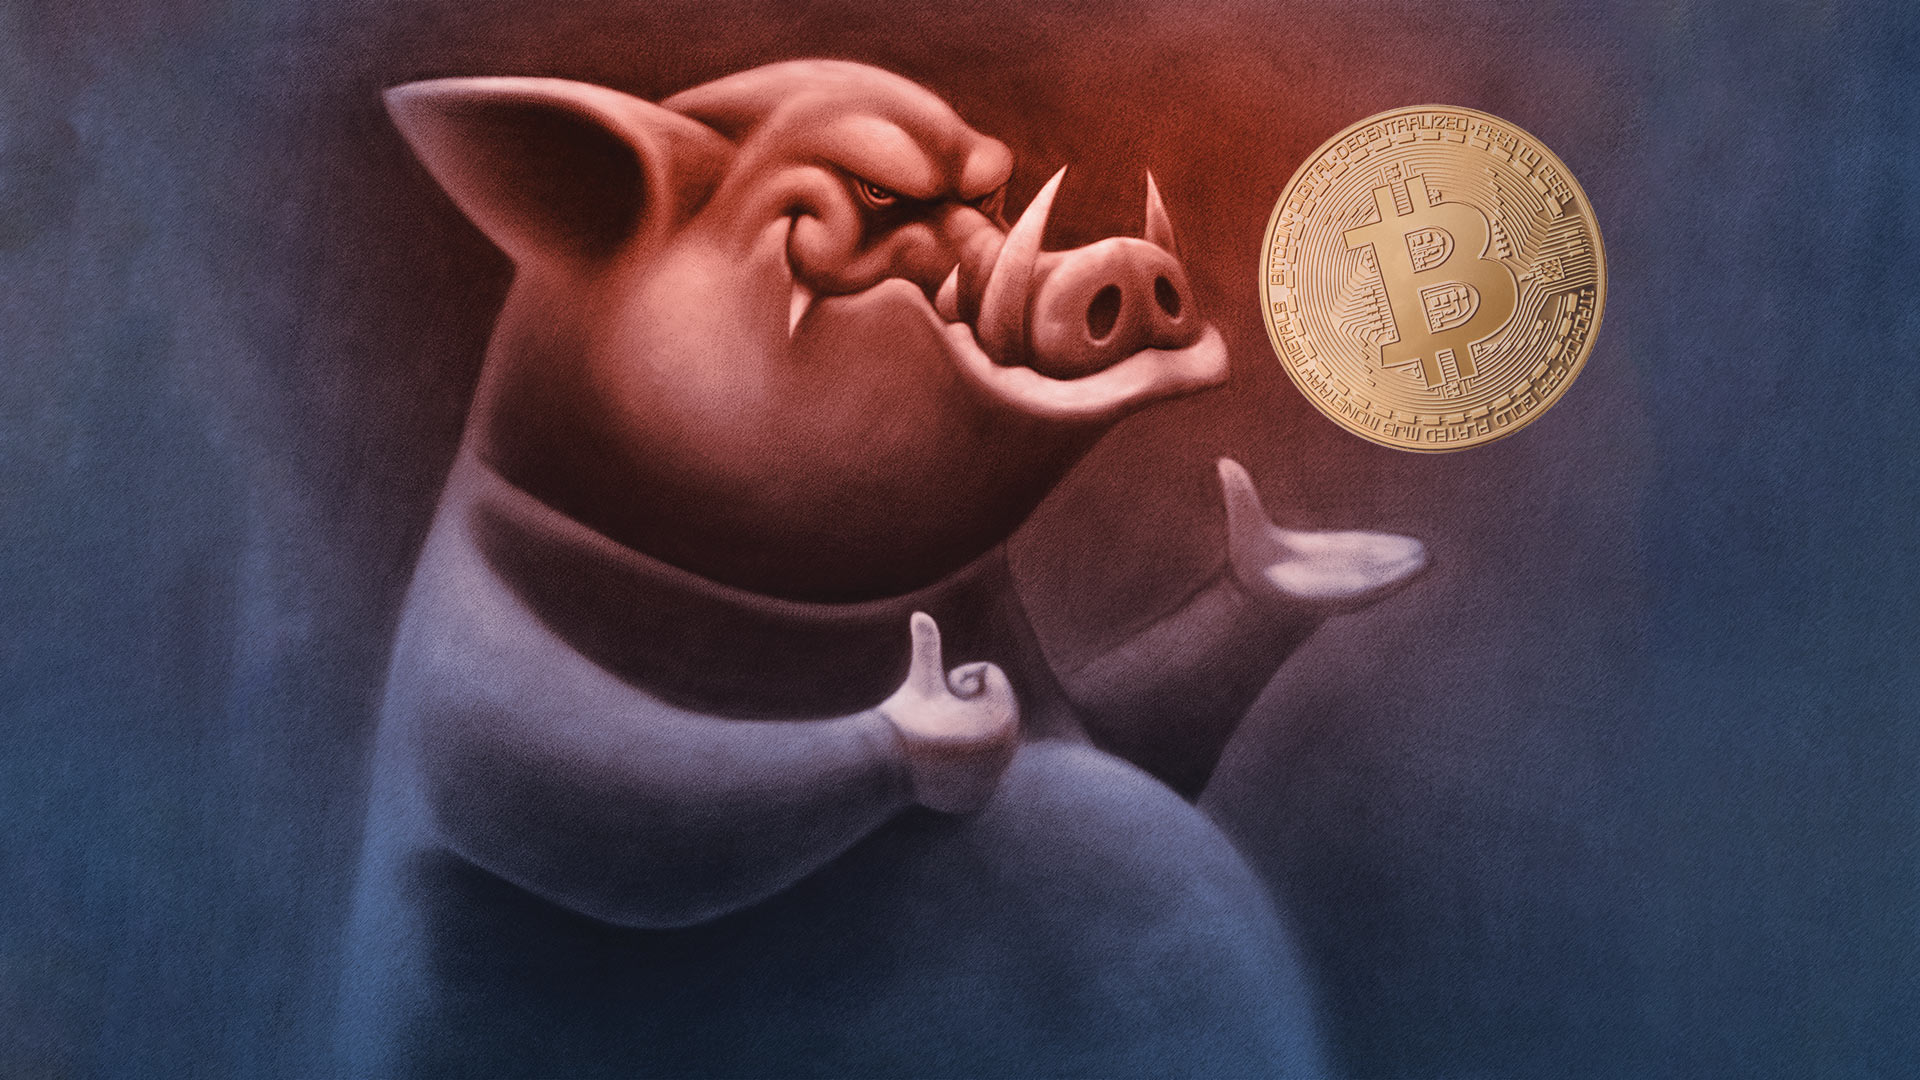 Over $73 Million Laundered: Two Arrested in Crypto “Pig Butchering” Scam Targeting US Banks